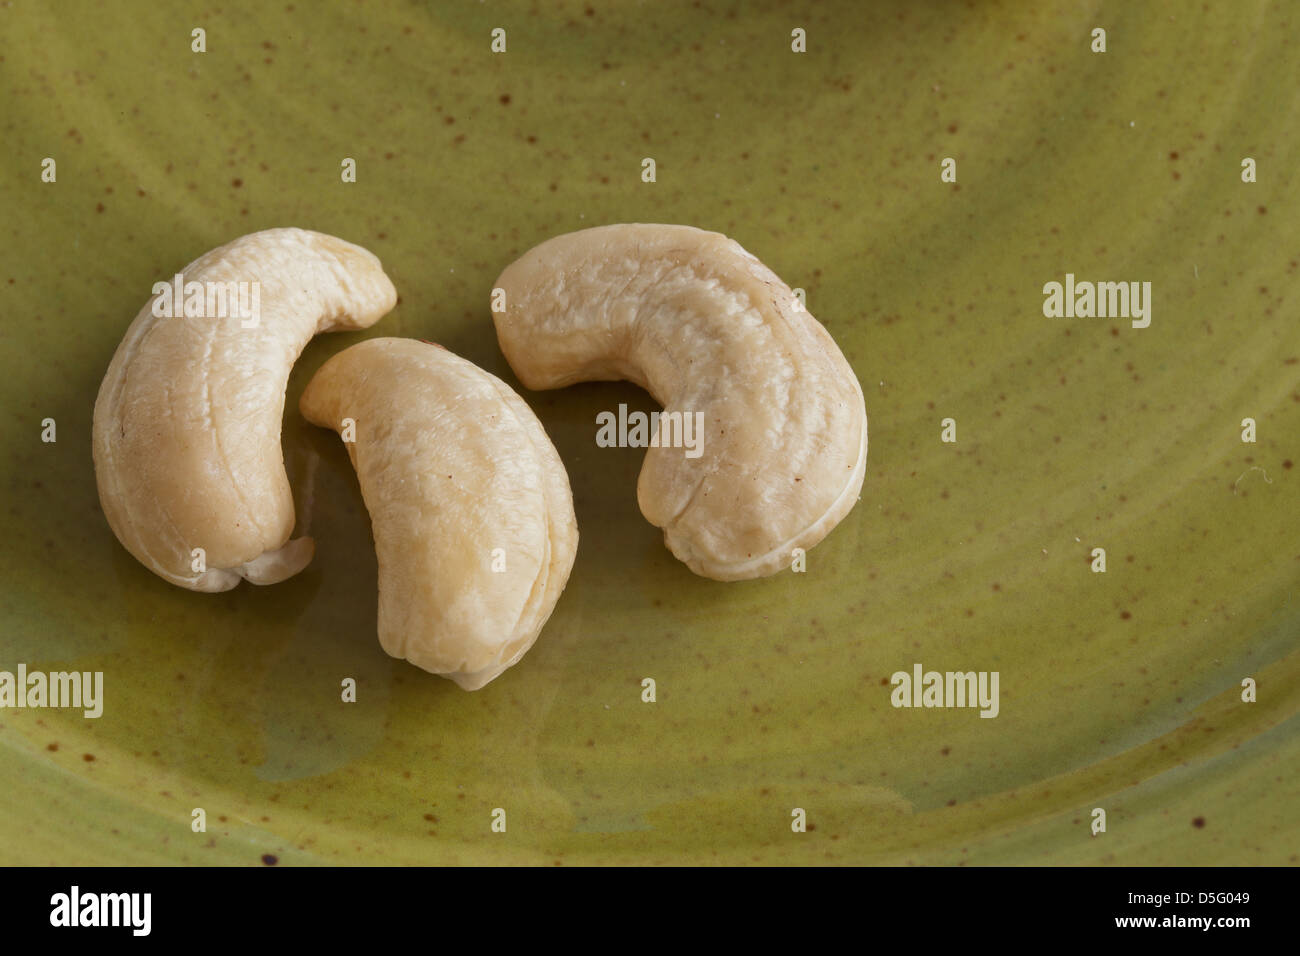 Raw Cashew nuts in a kitchen Stock Photo